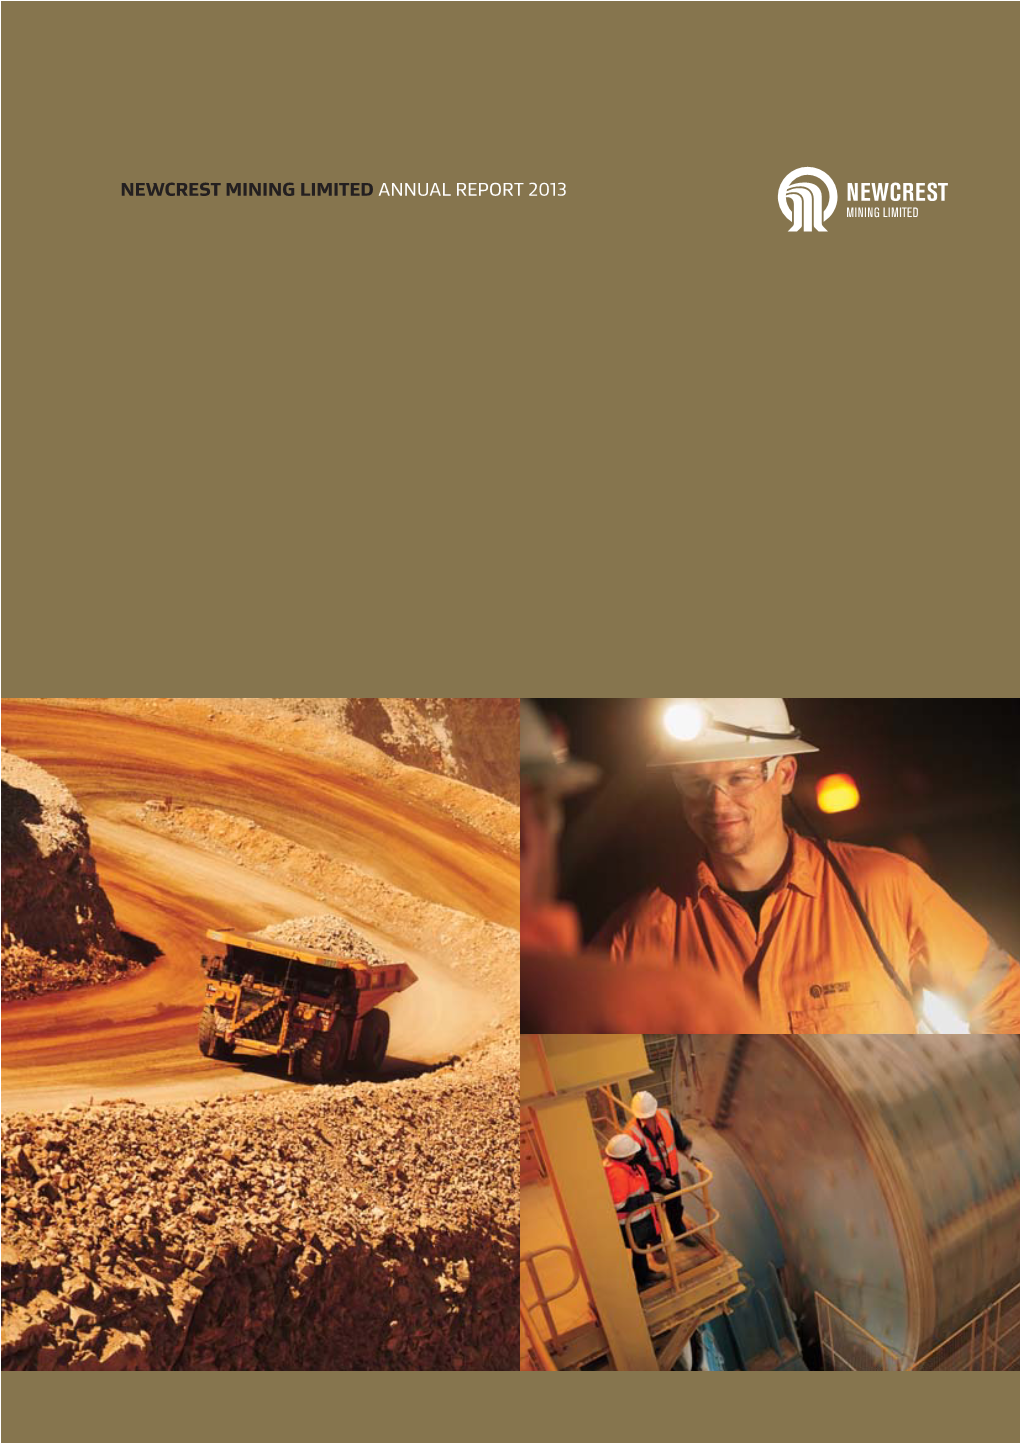 Newcrest Mining Limited Annual Report 2013